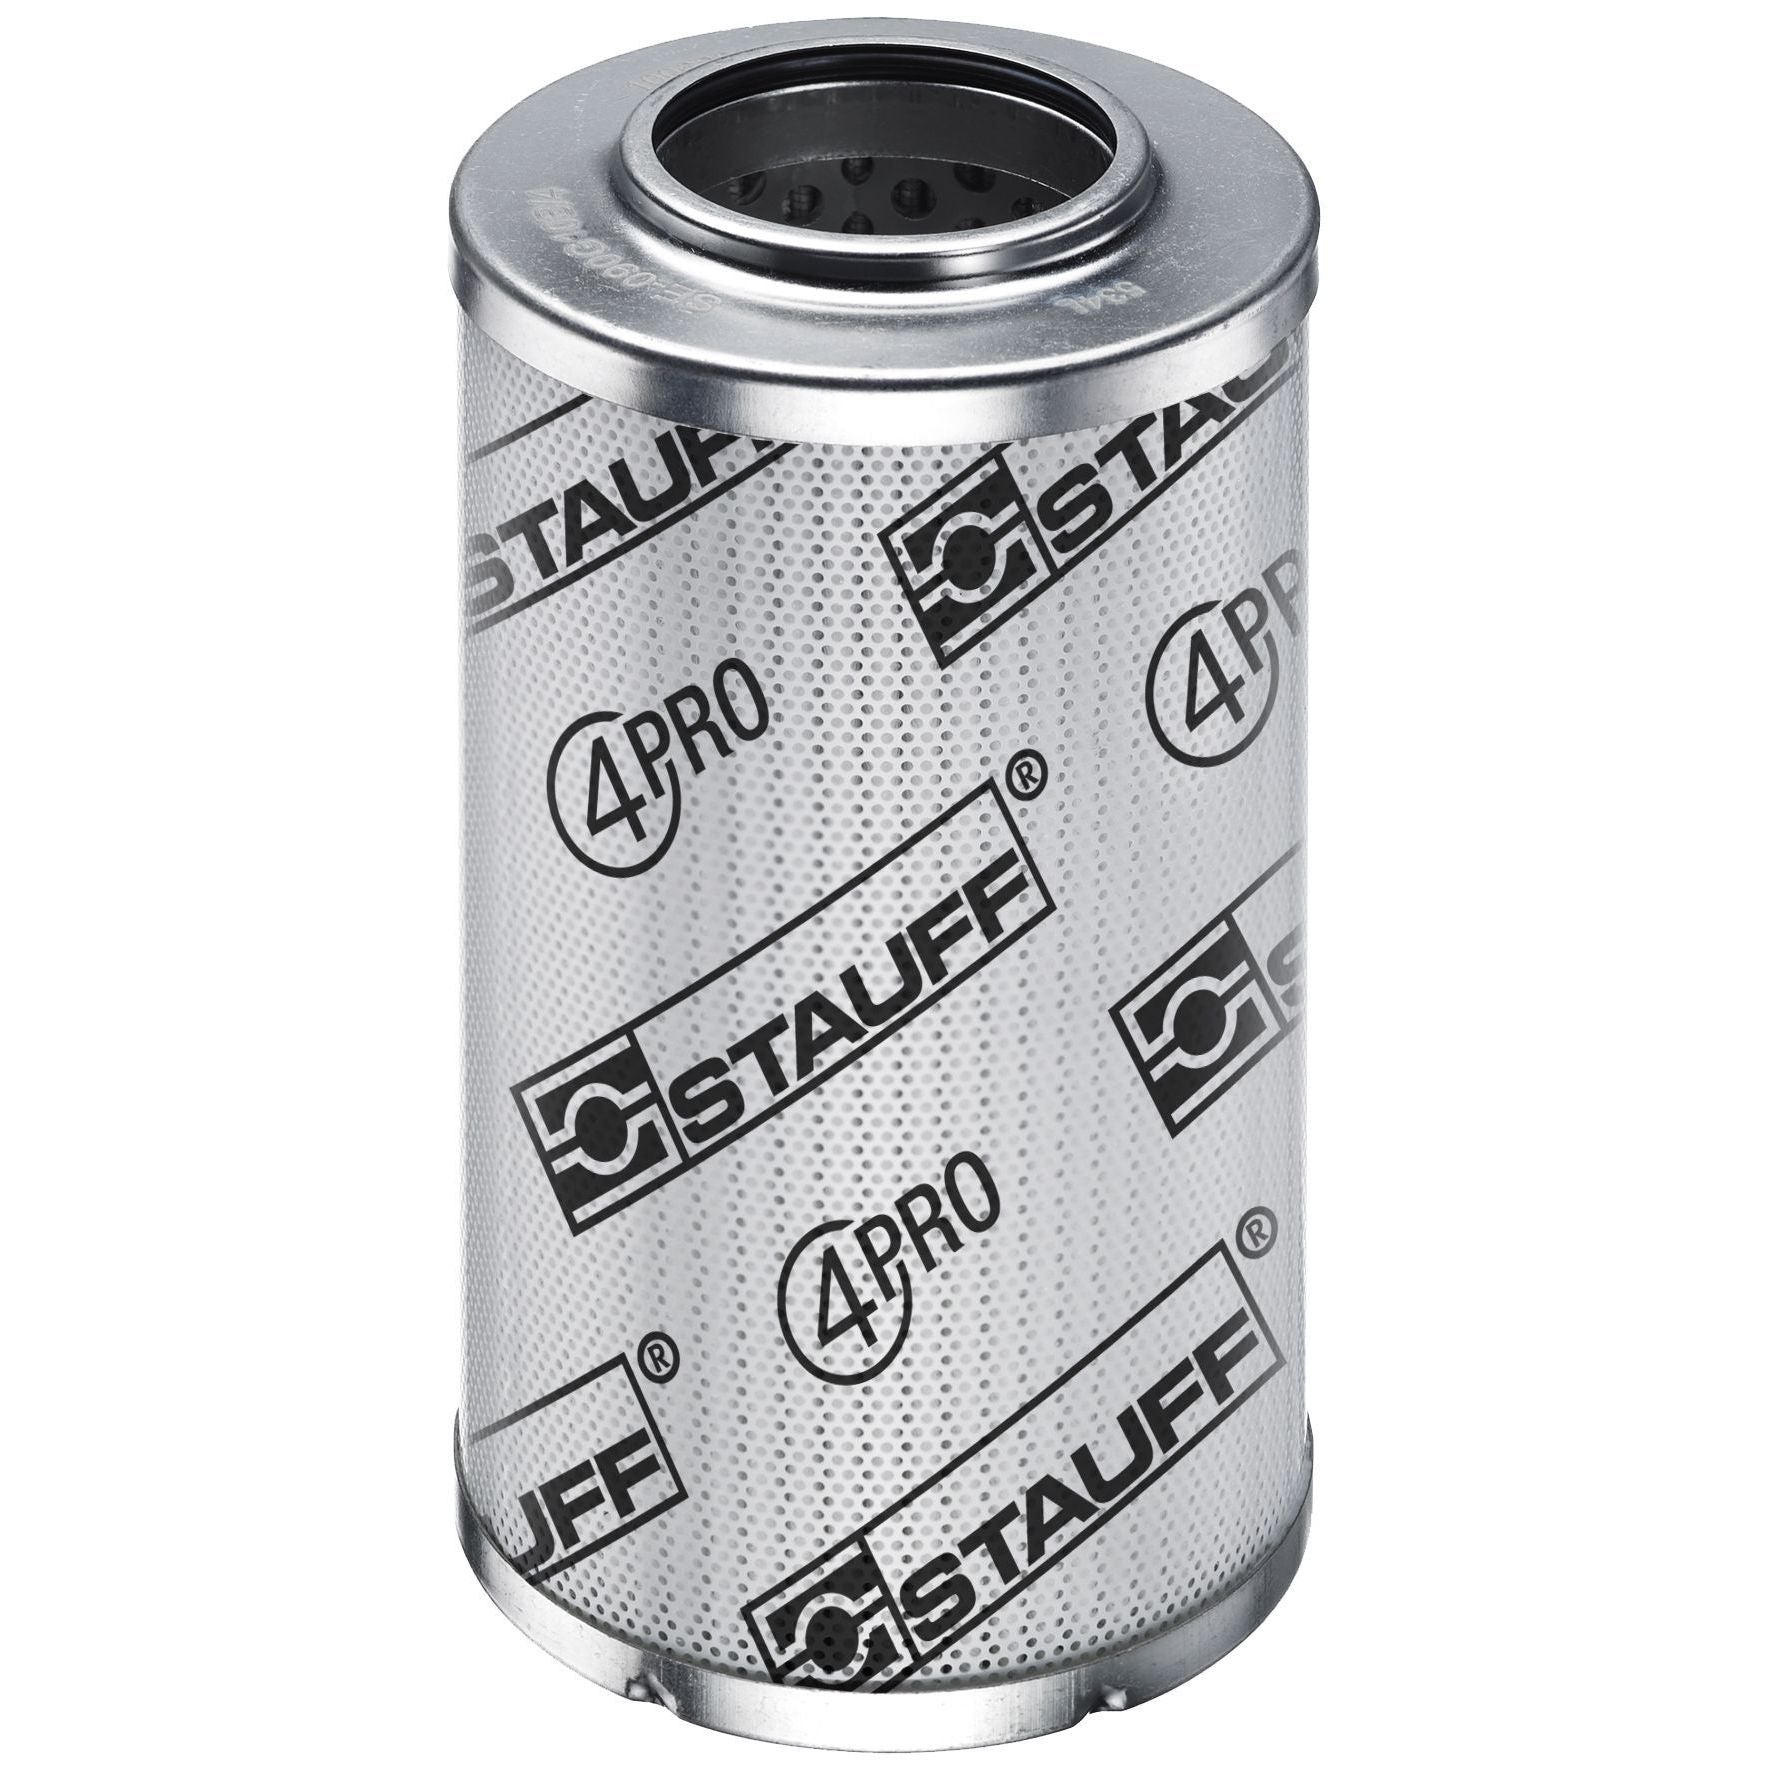 SE-160-S-25-B/3 : Stauff SF-160 Series Filter Element, 25 Micron, Stainless Mesh Media, 3045psi Collapse Differential, Buna